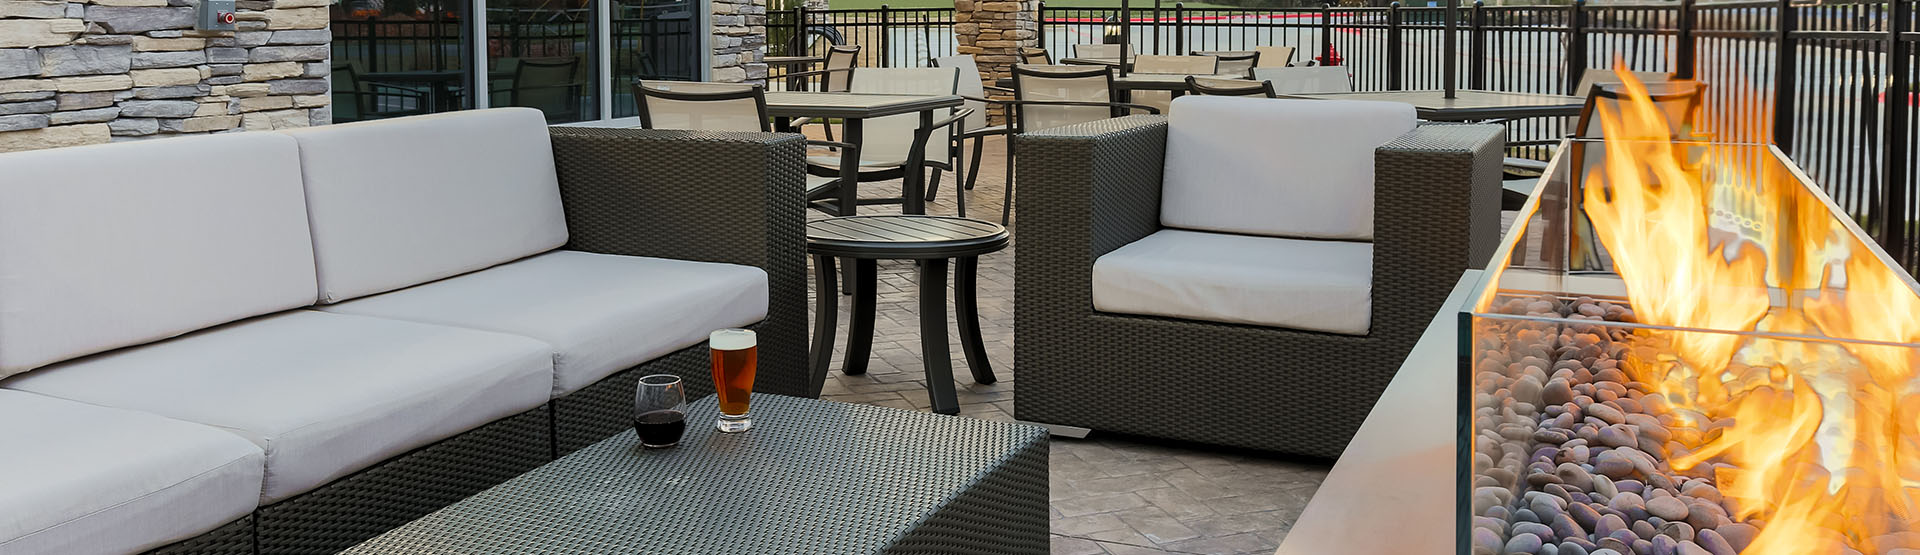 Hotel patio loung furniture with firepit